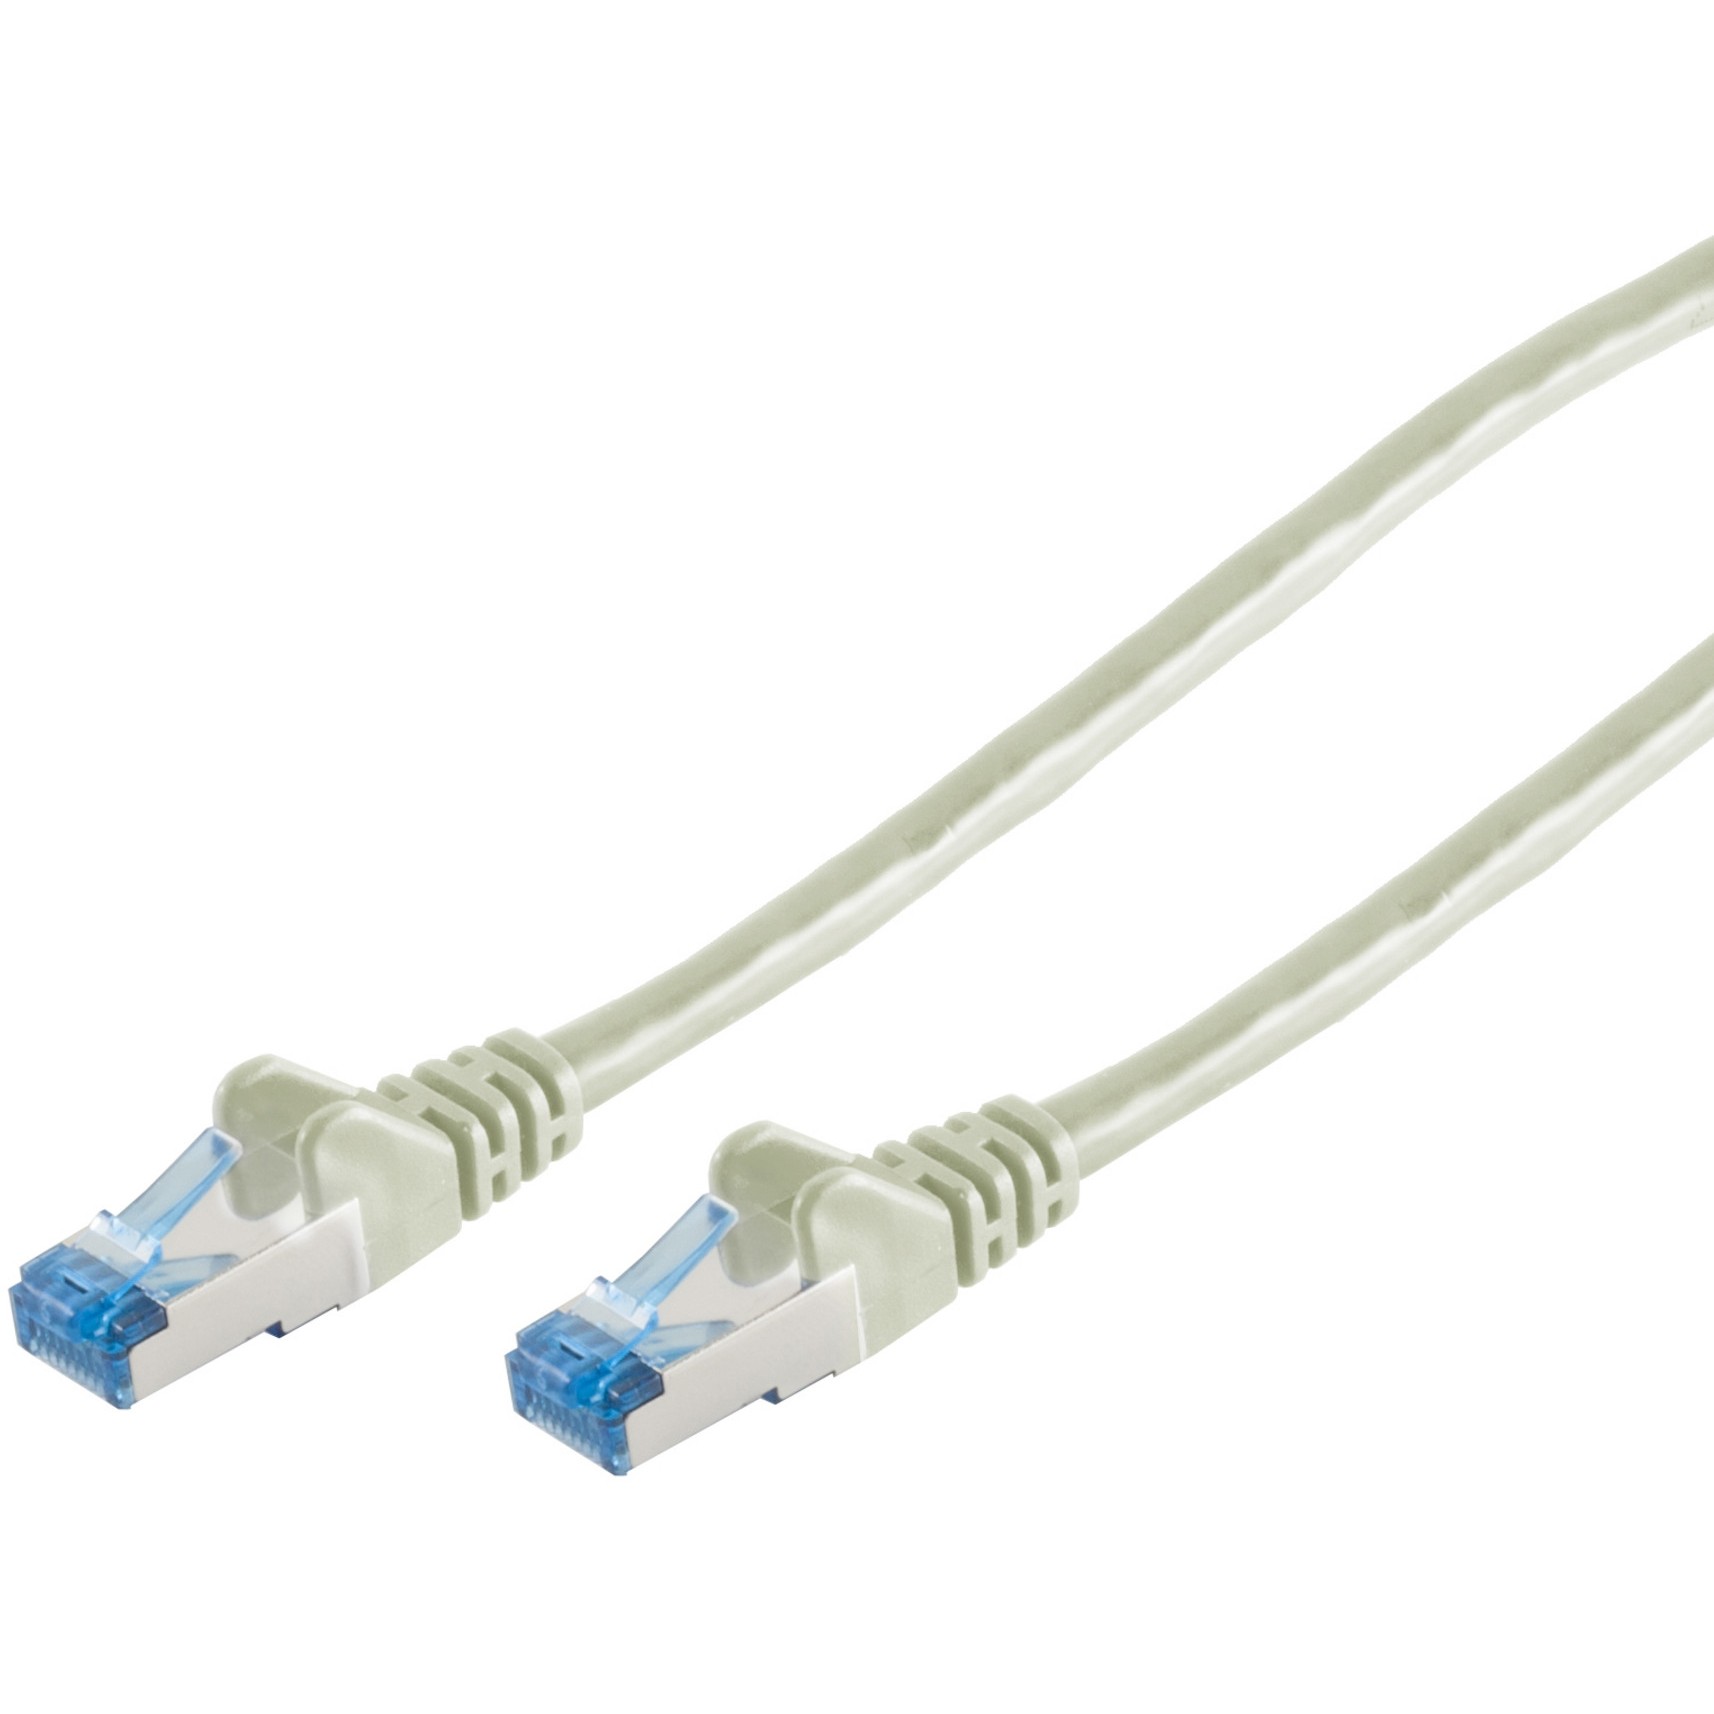 S-Conn 75711 – 0.25 cavo Patch grau 20 m networking cable